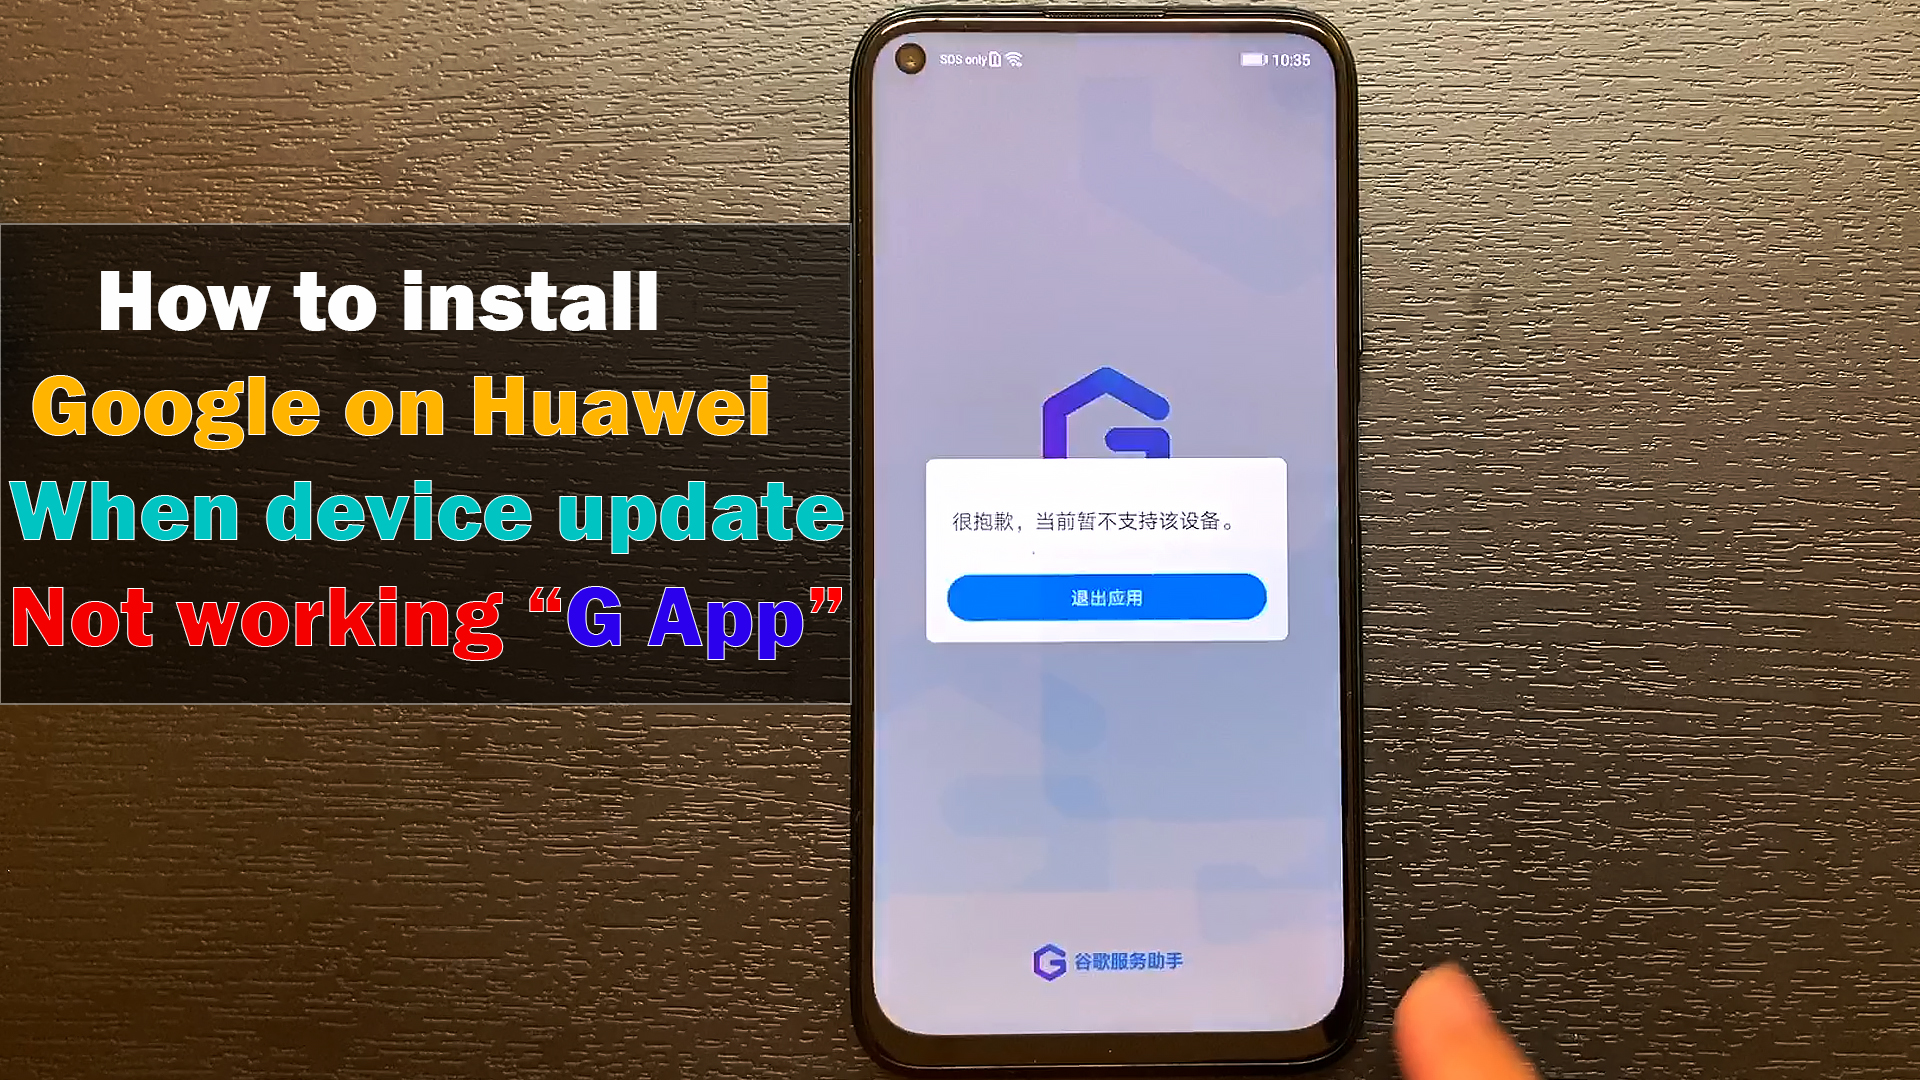 "G App" Not working how to install Google on HUAWEI when devices update